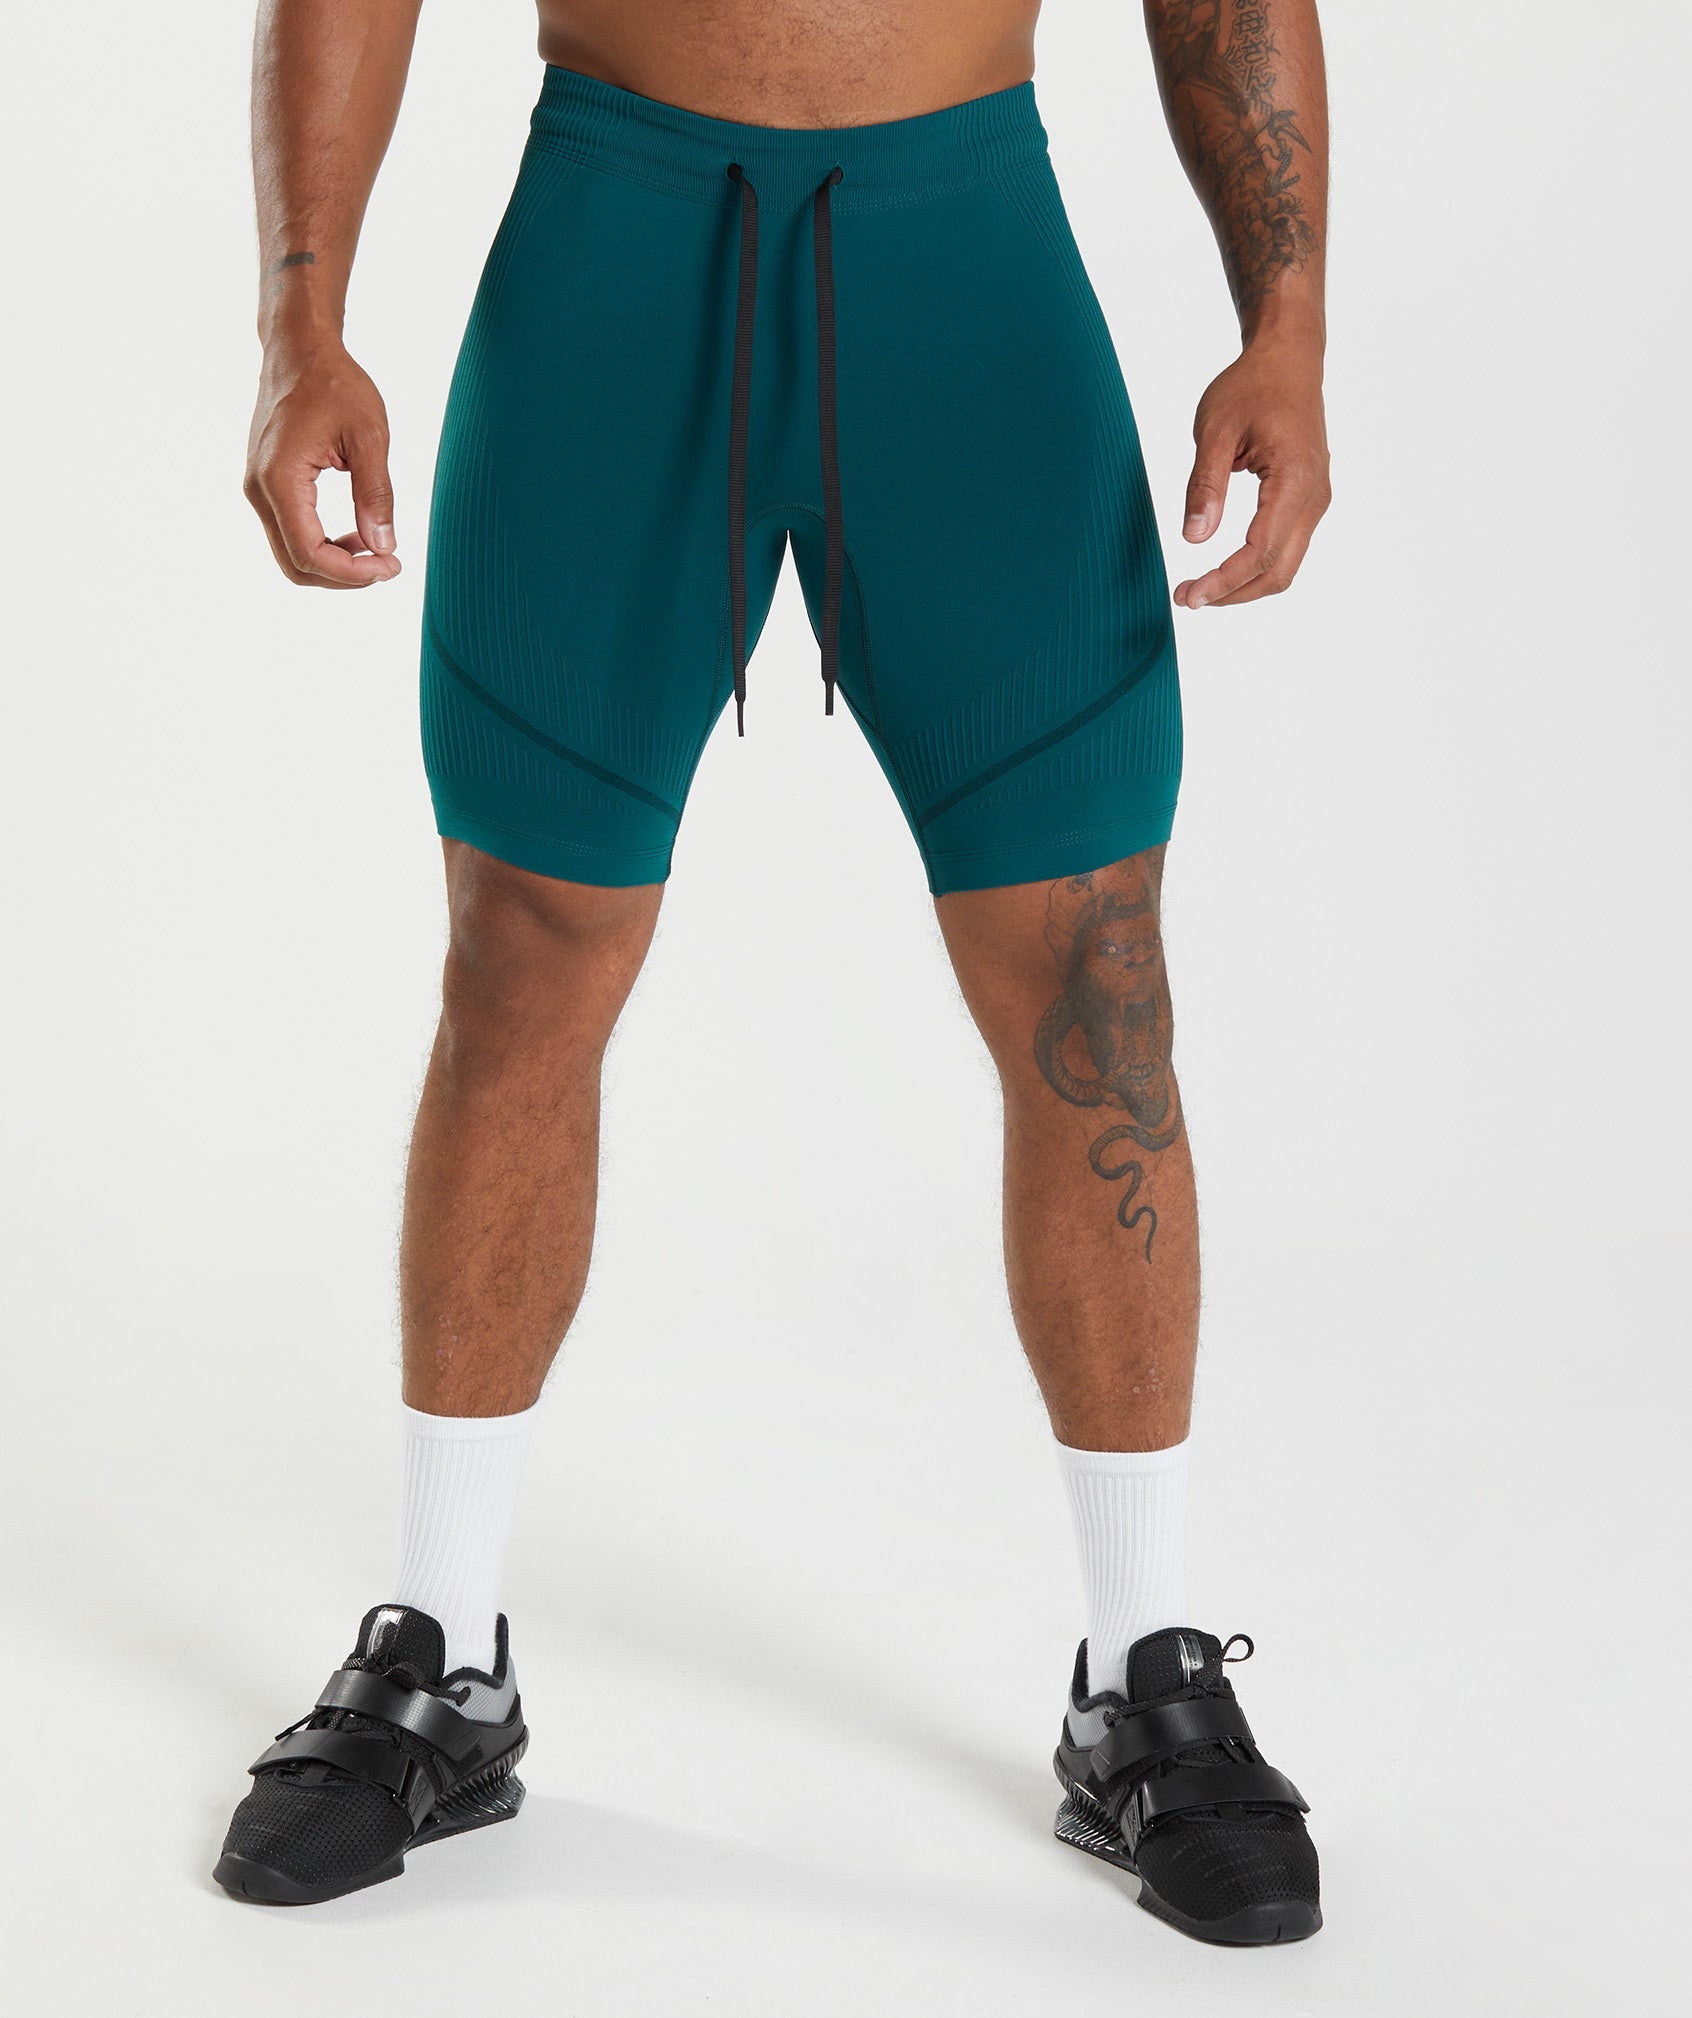 315 Seamless 1/2 Shorts in Winter Teal/Black - view 1